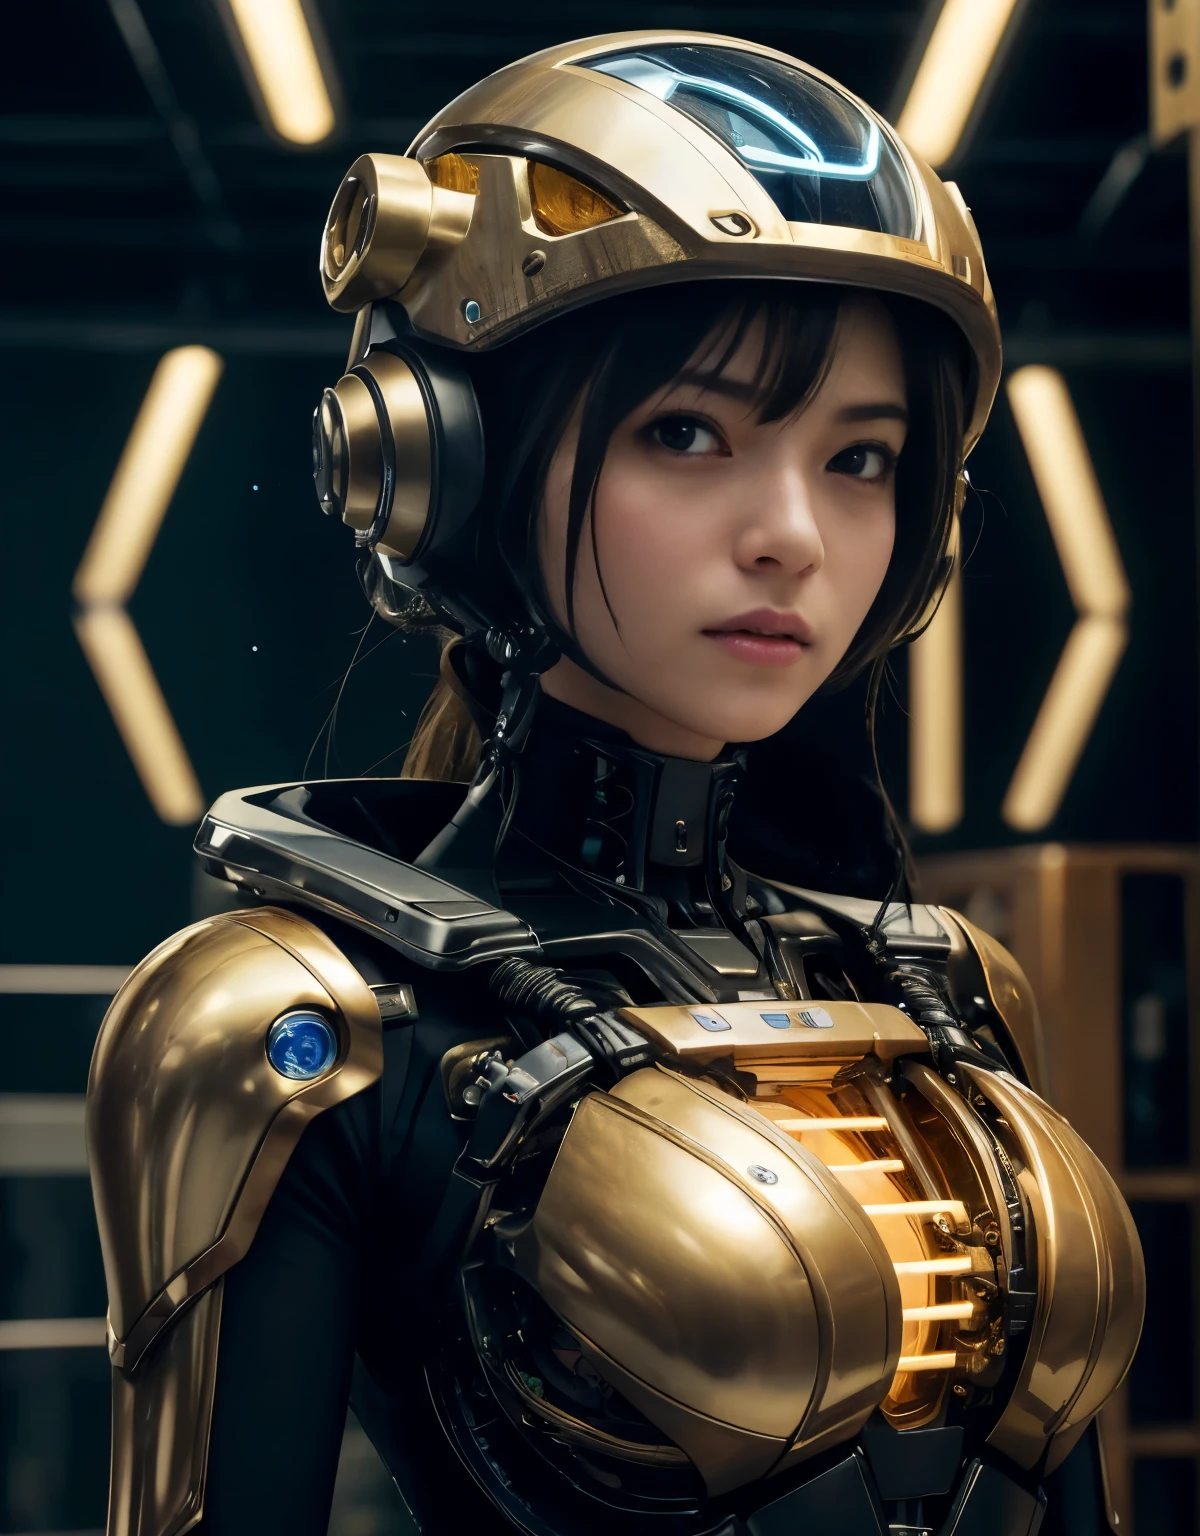 (Background of skimpy mechanical girl and octopus alien)、（Mystical expression）、highest quality、masterpiece、Super high resolution、(Photoreal:1.4)、RAW photo、1 girl、glowing skin、detailed face、(((1 Mechanical Girl)))、Heavy chest、（gold metal bodysuit）、(Natural alien background to fight aliens)、(Small LED)、((Super realistic details))、vertical giant monster background),global illumination、Shadow、octane rendering、24K、super sharp、roboTの背景、big breasts、Raw skin exposed in the cleavage、intricate decorative details、Japan details、very intricate details、realistic light、(Mystical expression),CG Society Trenlow Eyes、Eyes shining towards the camera、Mechanical marginal blood vessels connected to neon detail tubes)、(Wires and cables connecting to the head)、Small LED、,mechanical thighs、two stock、（Hands are also made of machines）、roboT、future alien、Please wear a mechanical helmet、transparent face guard on helmet,